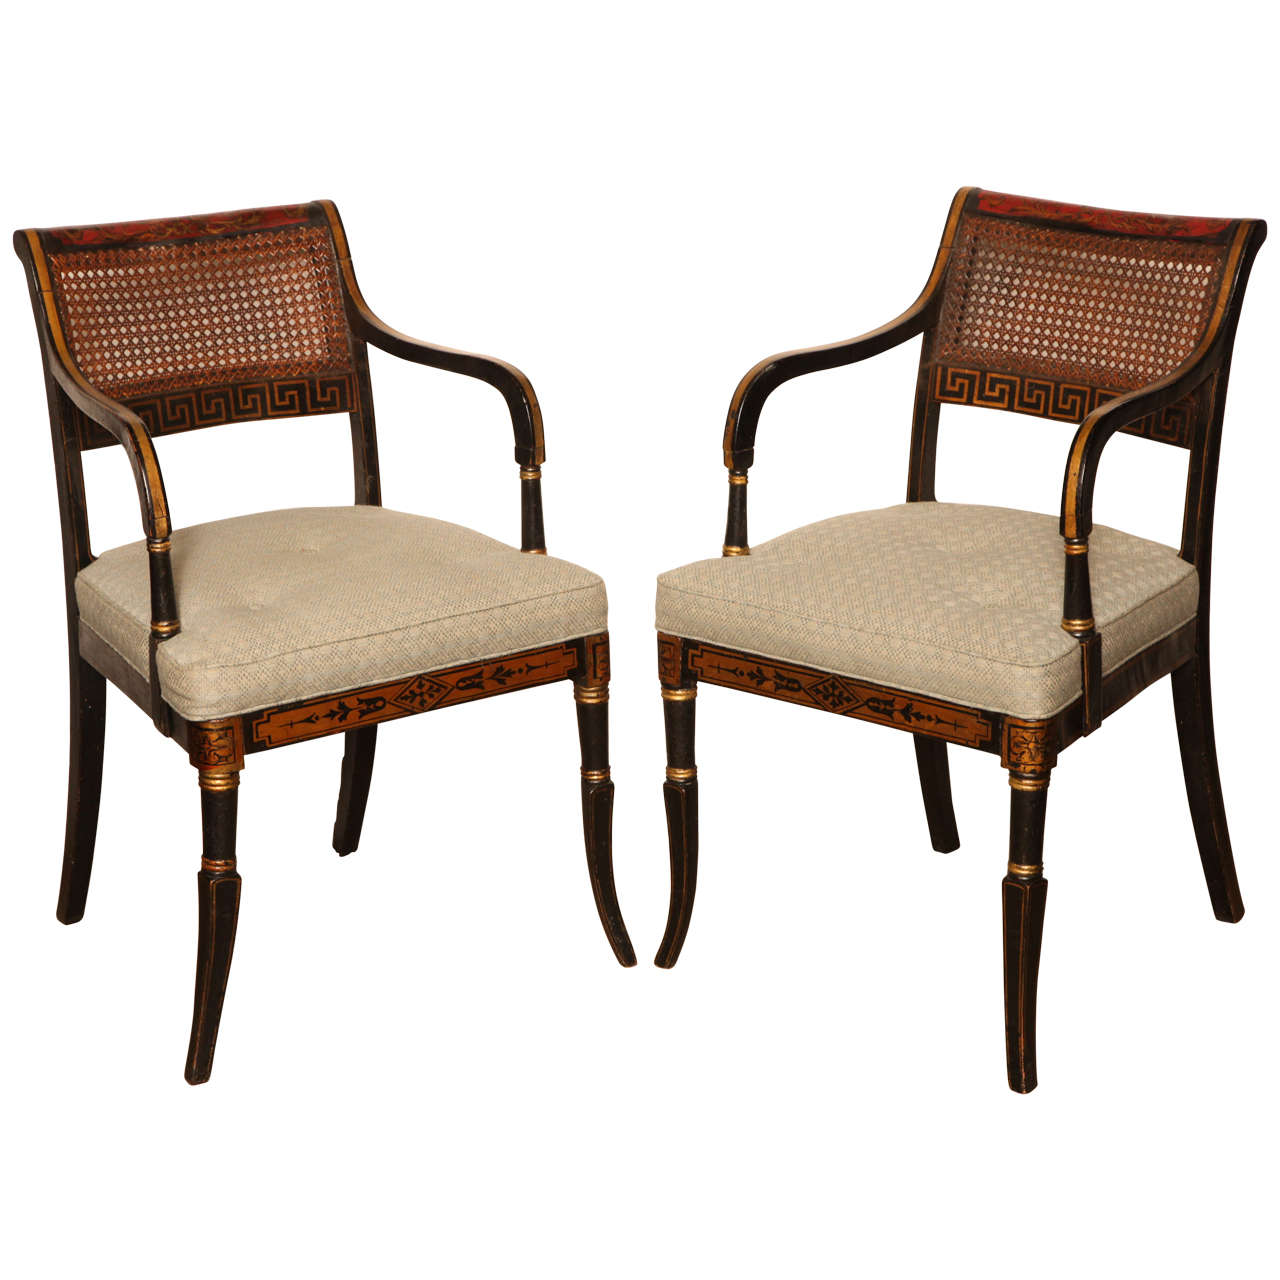 Pair of 19th Century English Regency Neoclassical Caned Armchairs